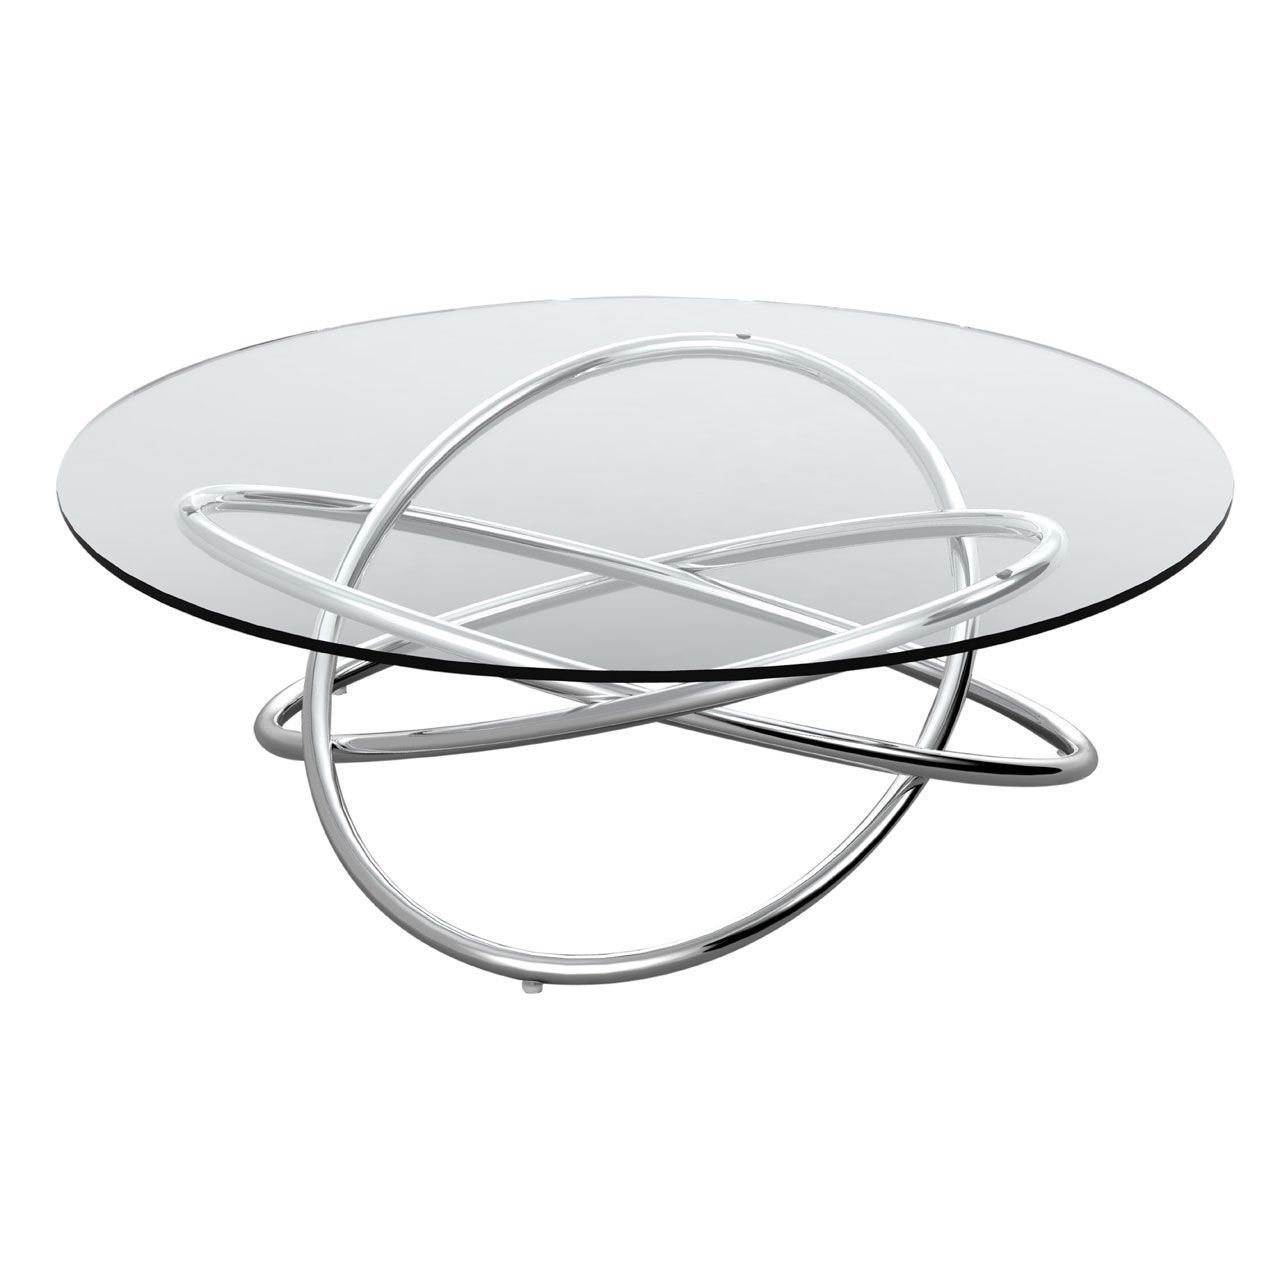 Image 1 | Round Glass Coffee Table, Glass Coffee Table Pertaining To Silver Stainless Steel Coffee Tables (View 4 of 15)